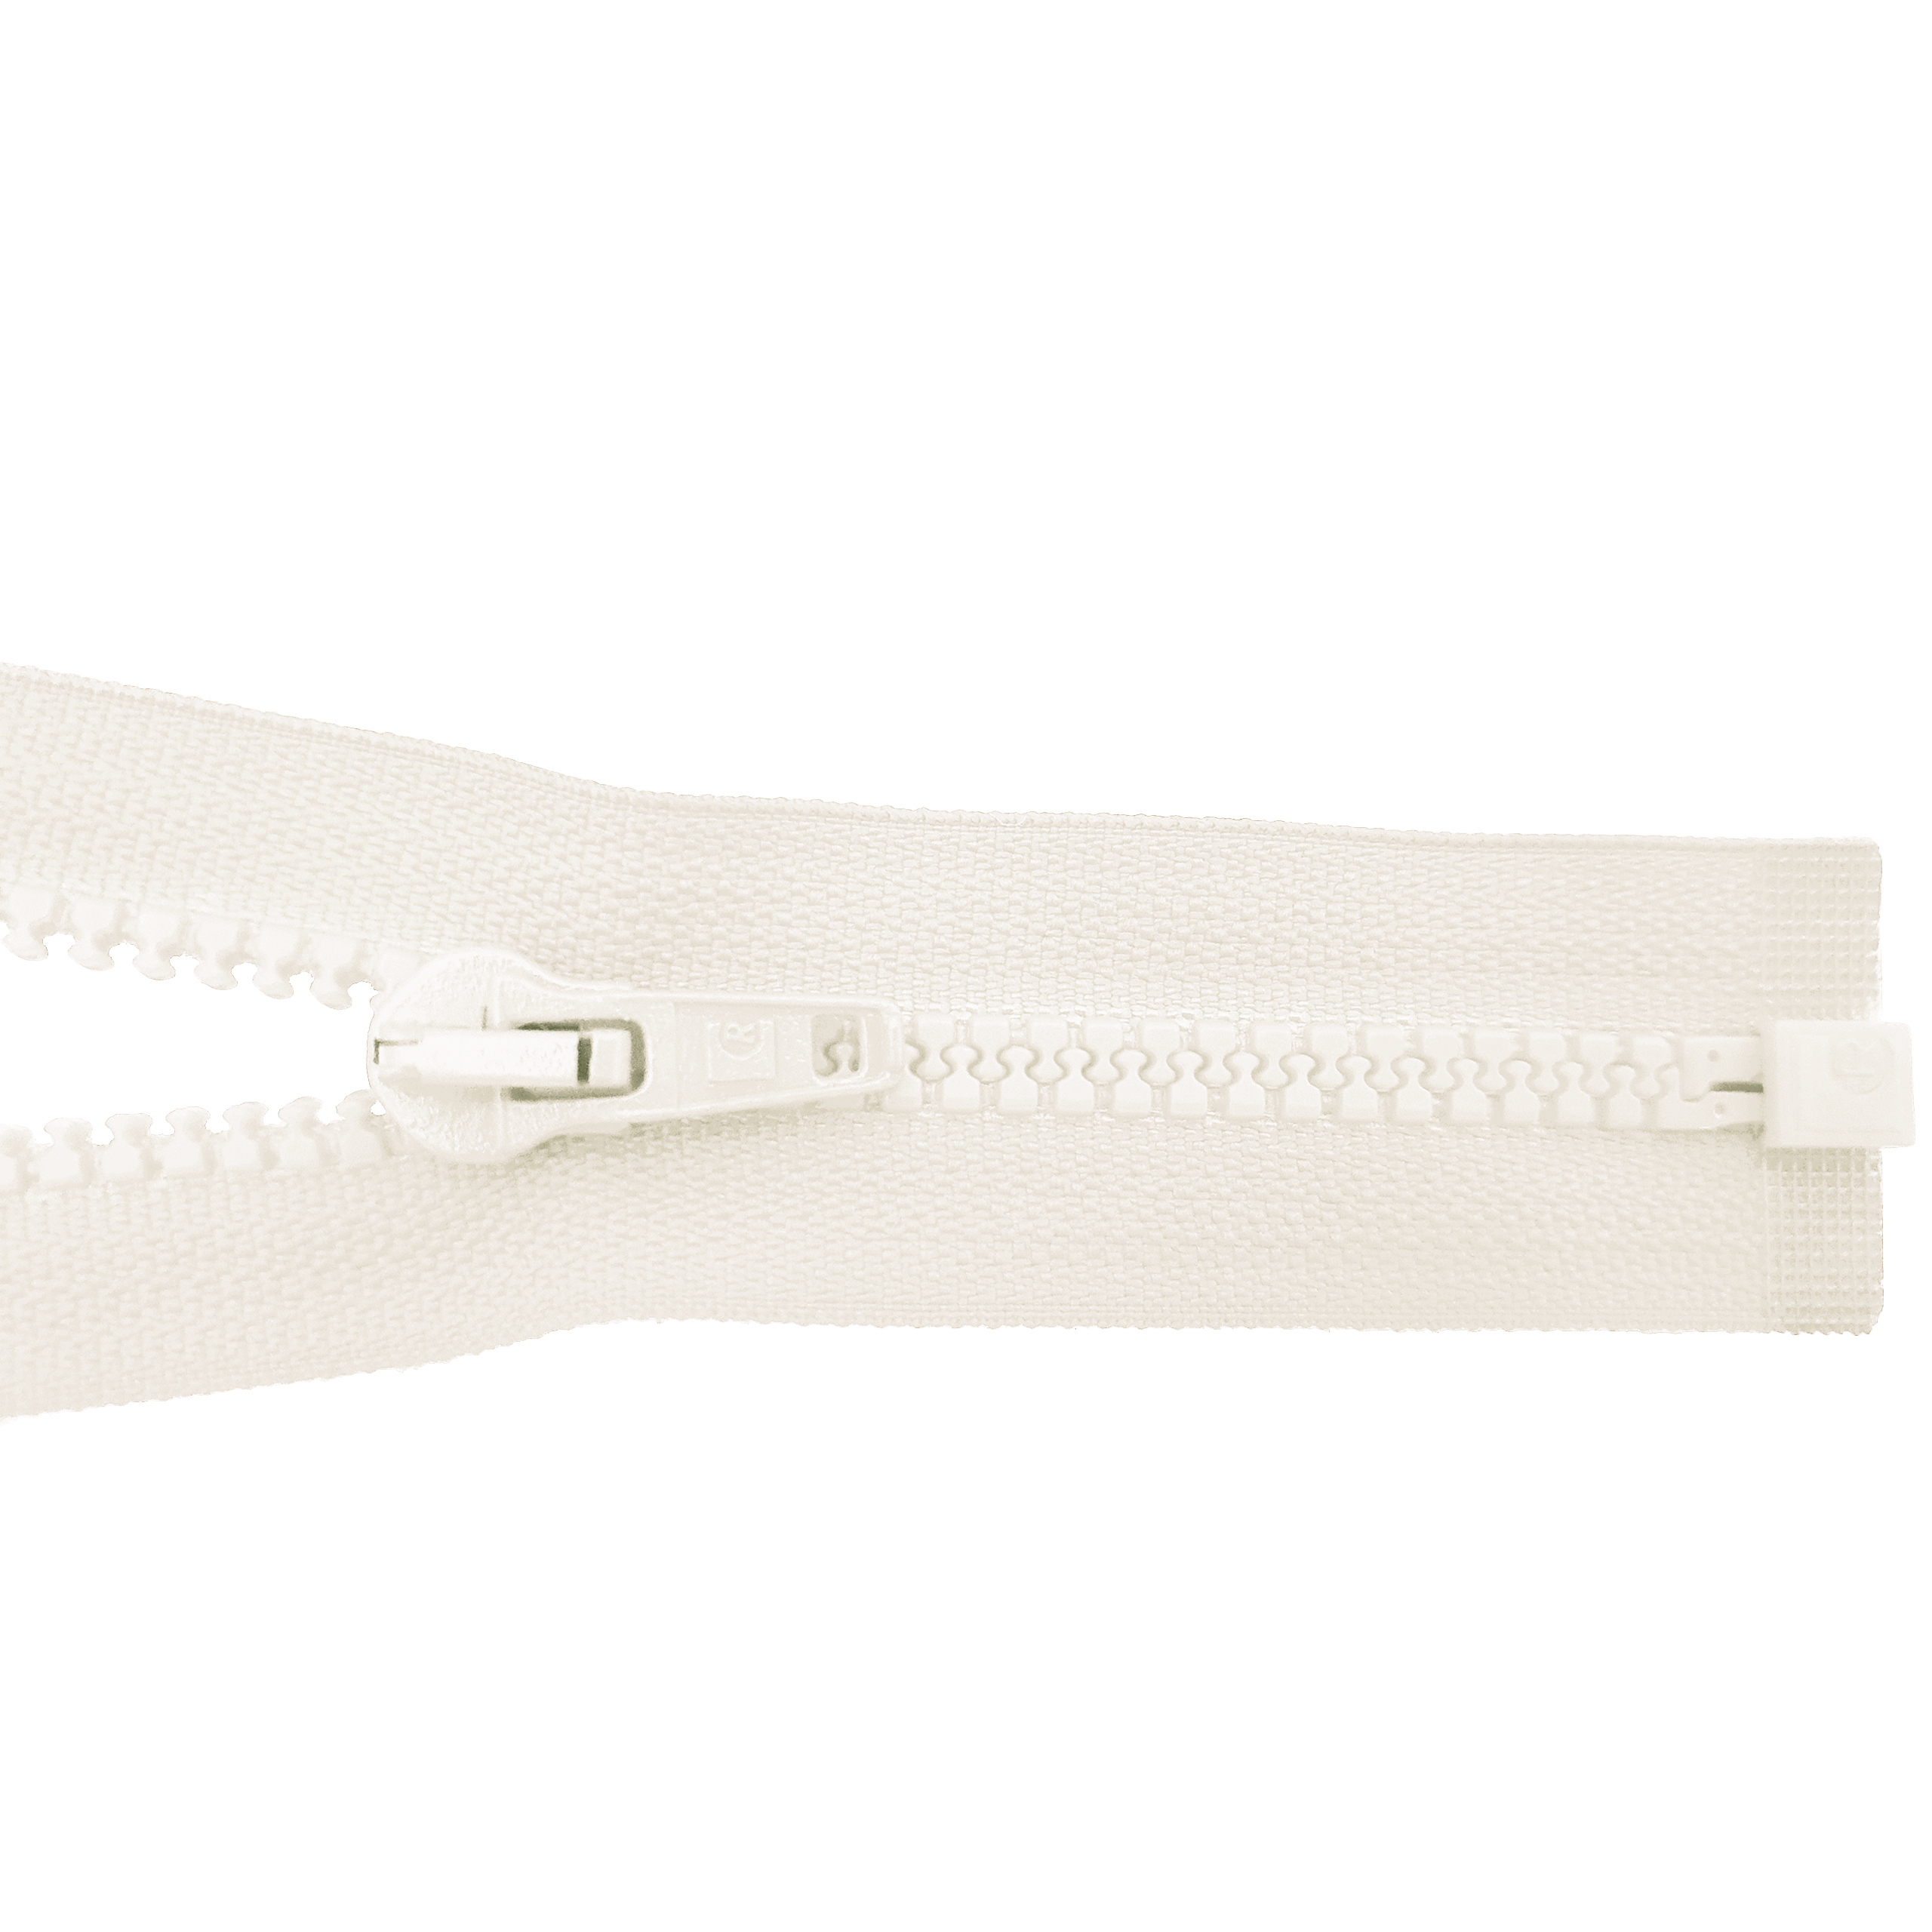 zipper 80cm,divisible, molded plastic, wide, raw white